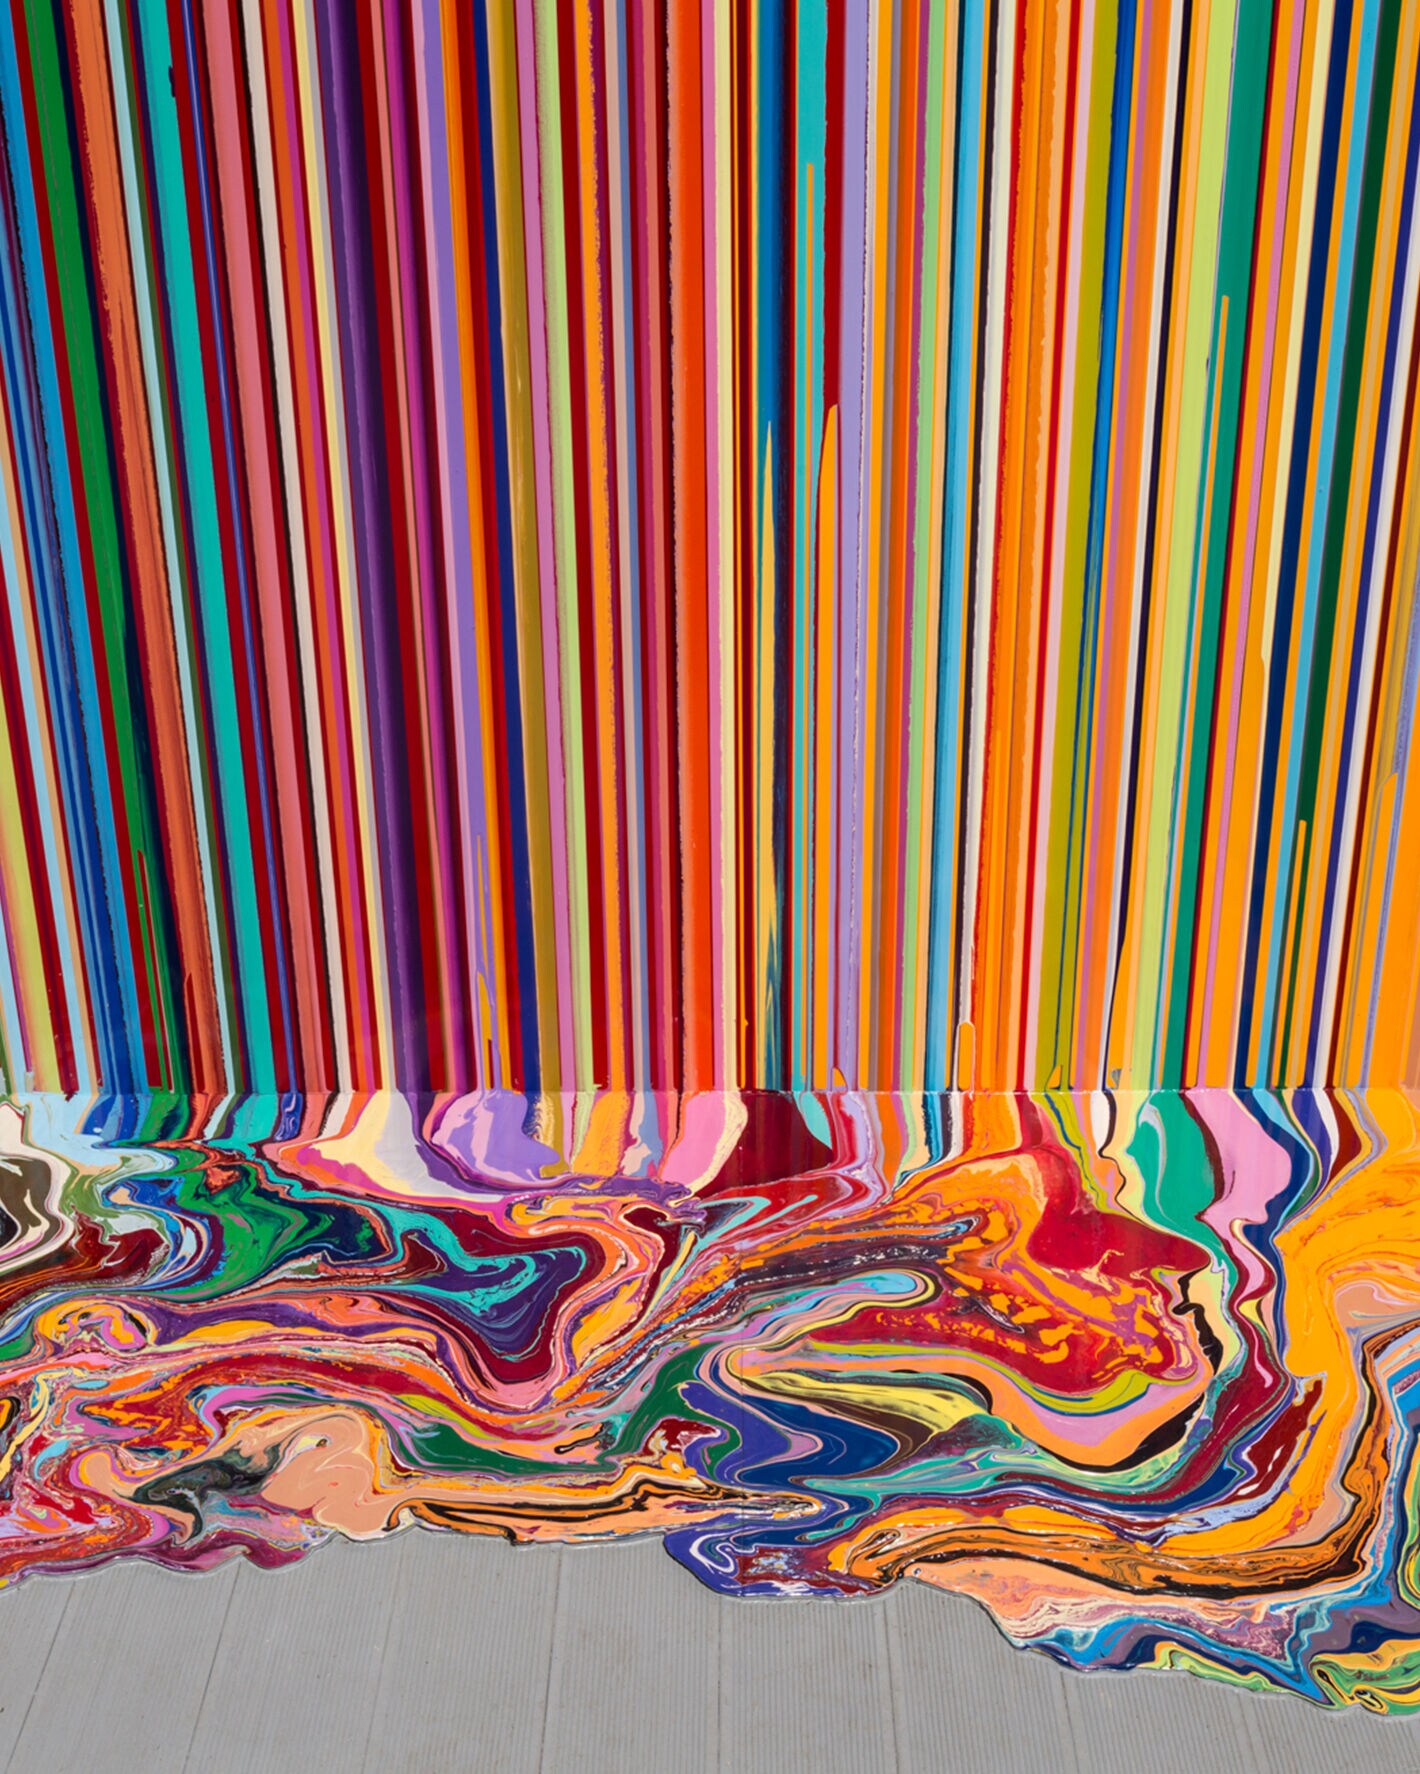 The artwork behind Swatch WIDE ACRES OF TIME, created by Ian Davenport for La Biennale Venezia, 2017